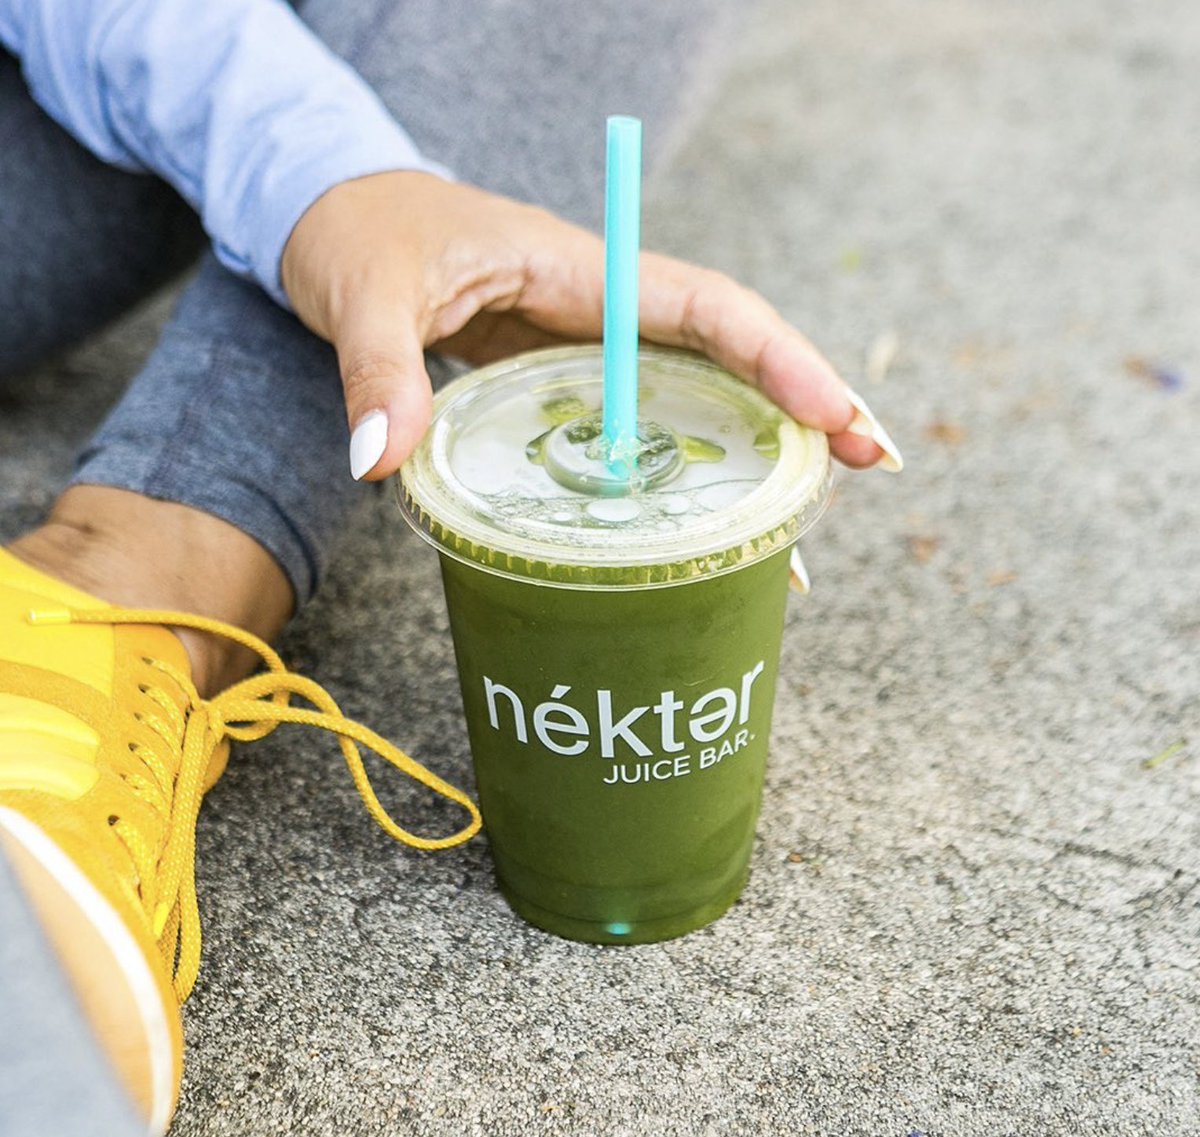 Which will be your drink of choice, a sweet smoothie, or a nutritional green juice? There is never a wrong answer when choosing @nekterjuicebar. ☀️💚

#shoptheplaza #eatattheplaza #dallasshopping #luxuryshopping #dallastx #dallasboutique #dallaslifestyle #juice #nekter #smoothie